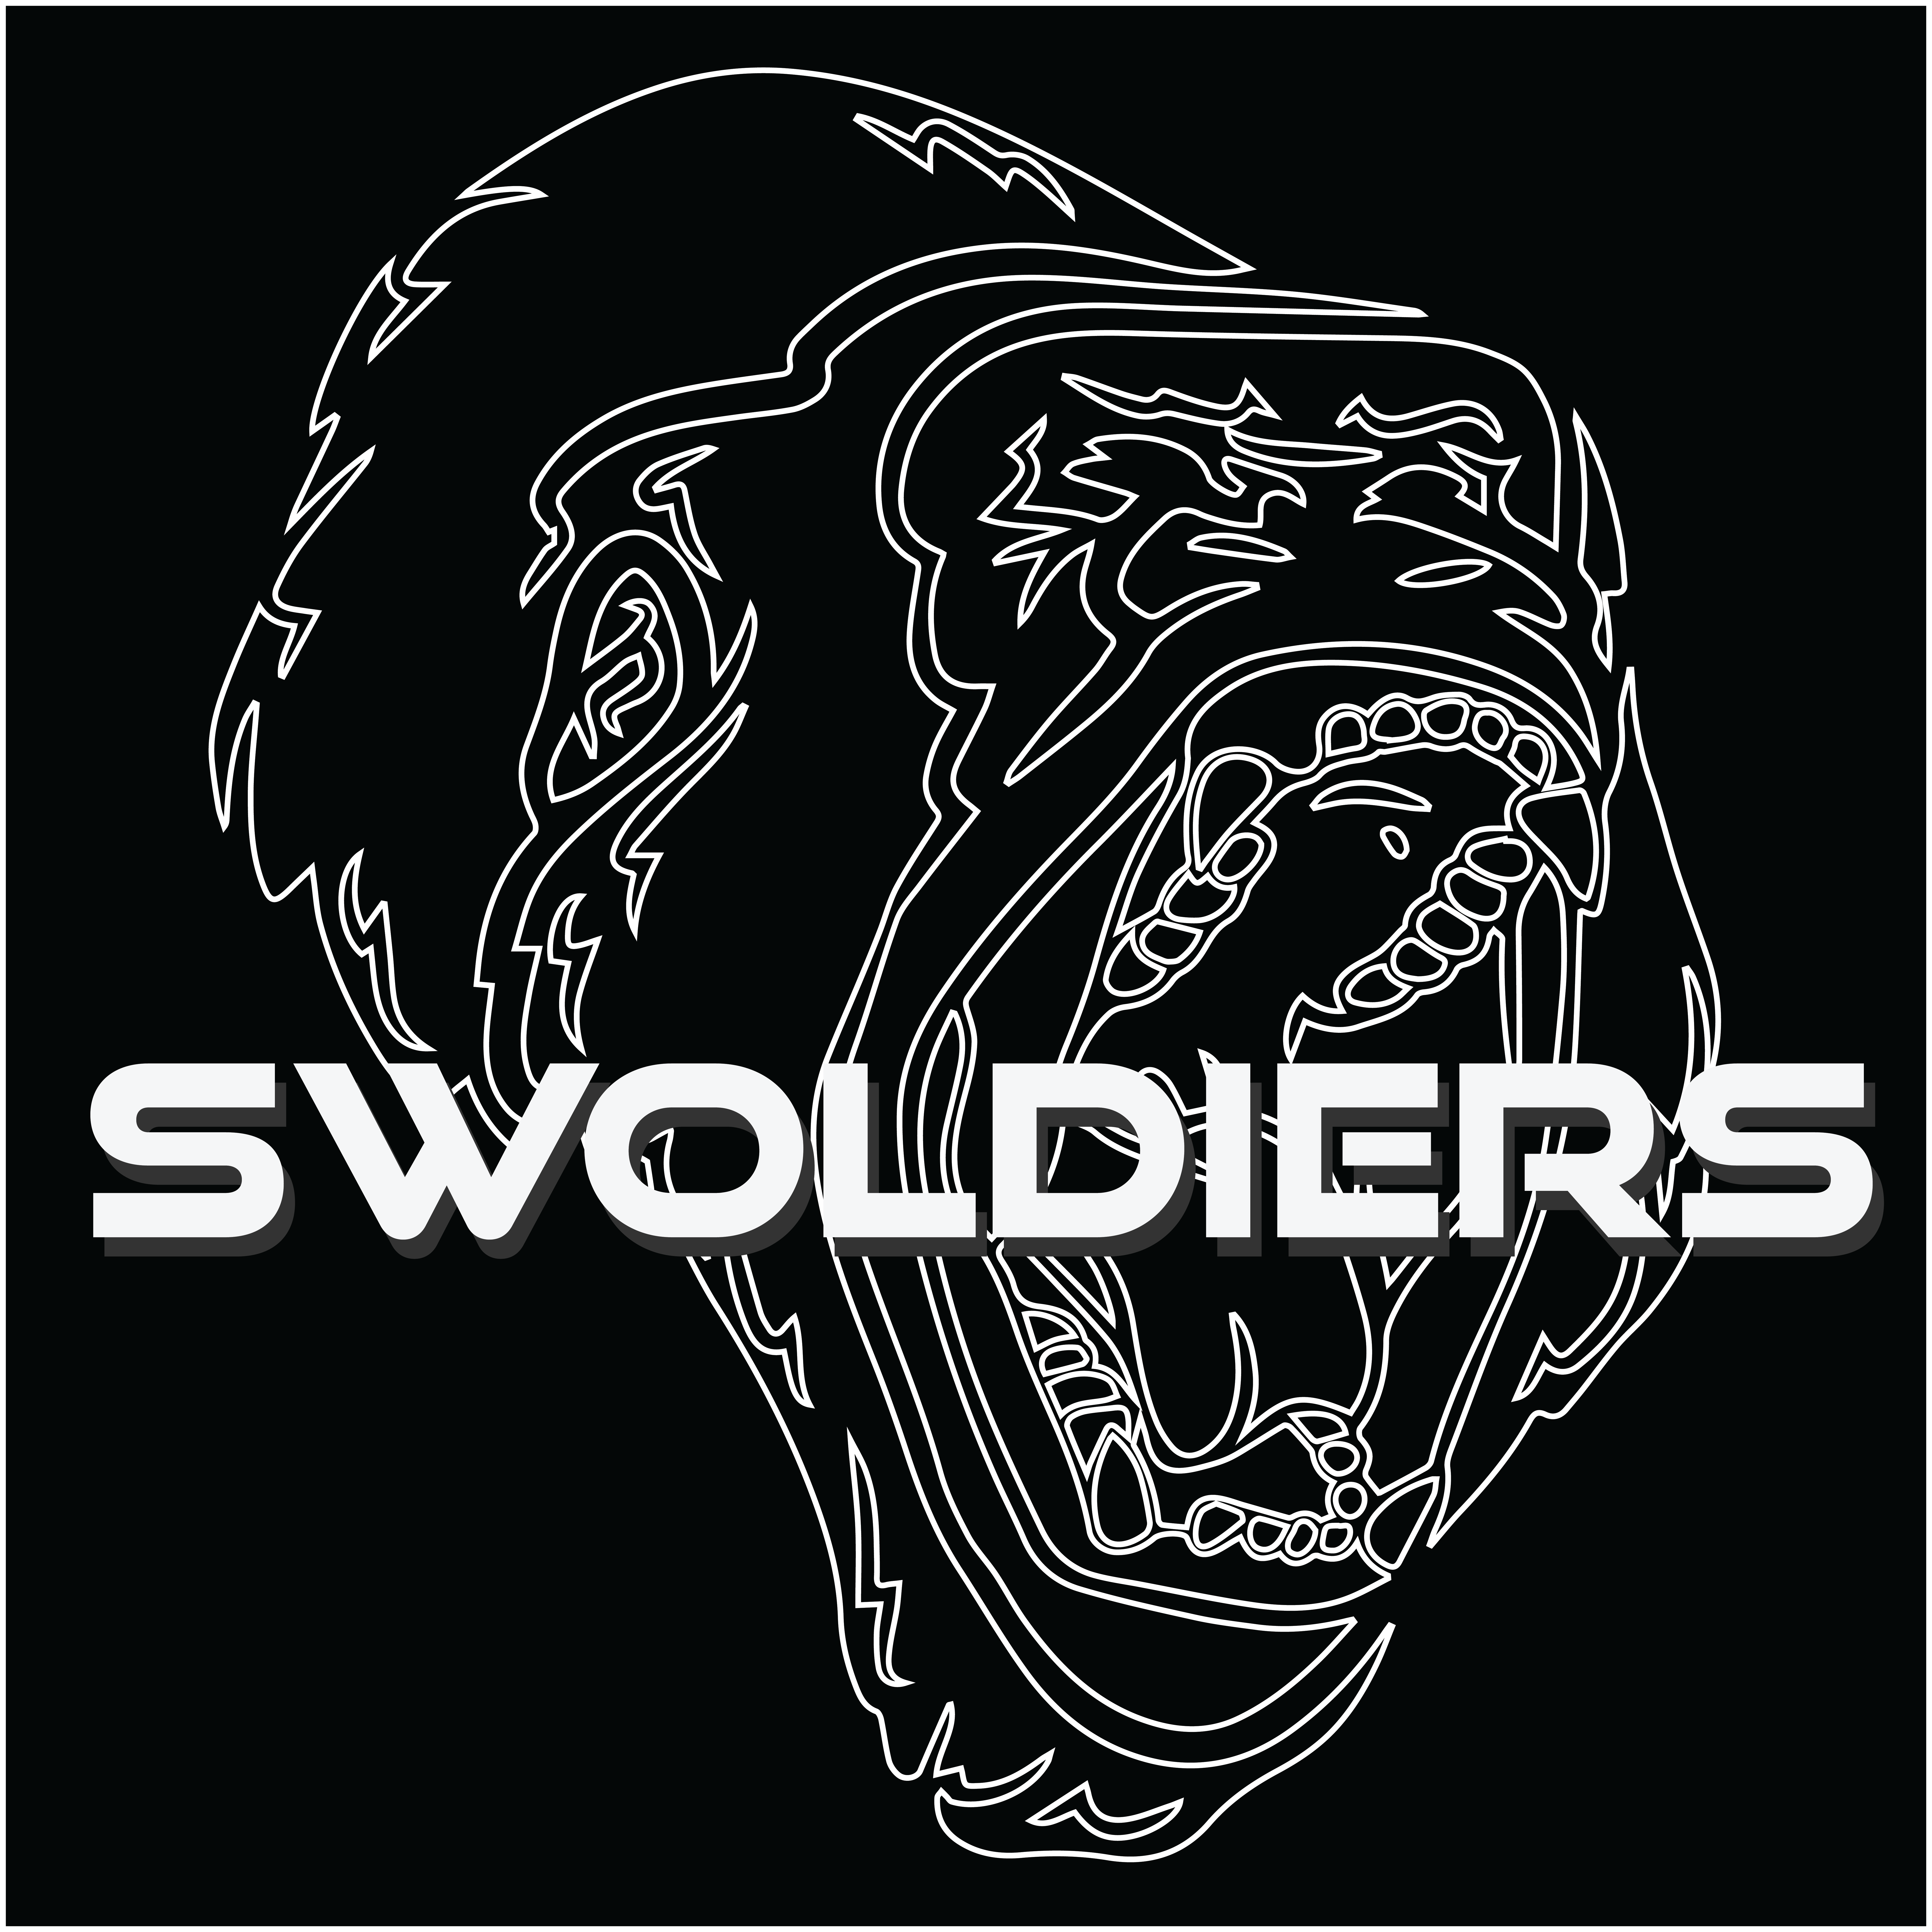 logo sample, swoldiers